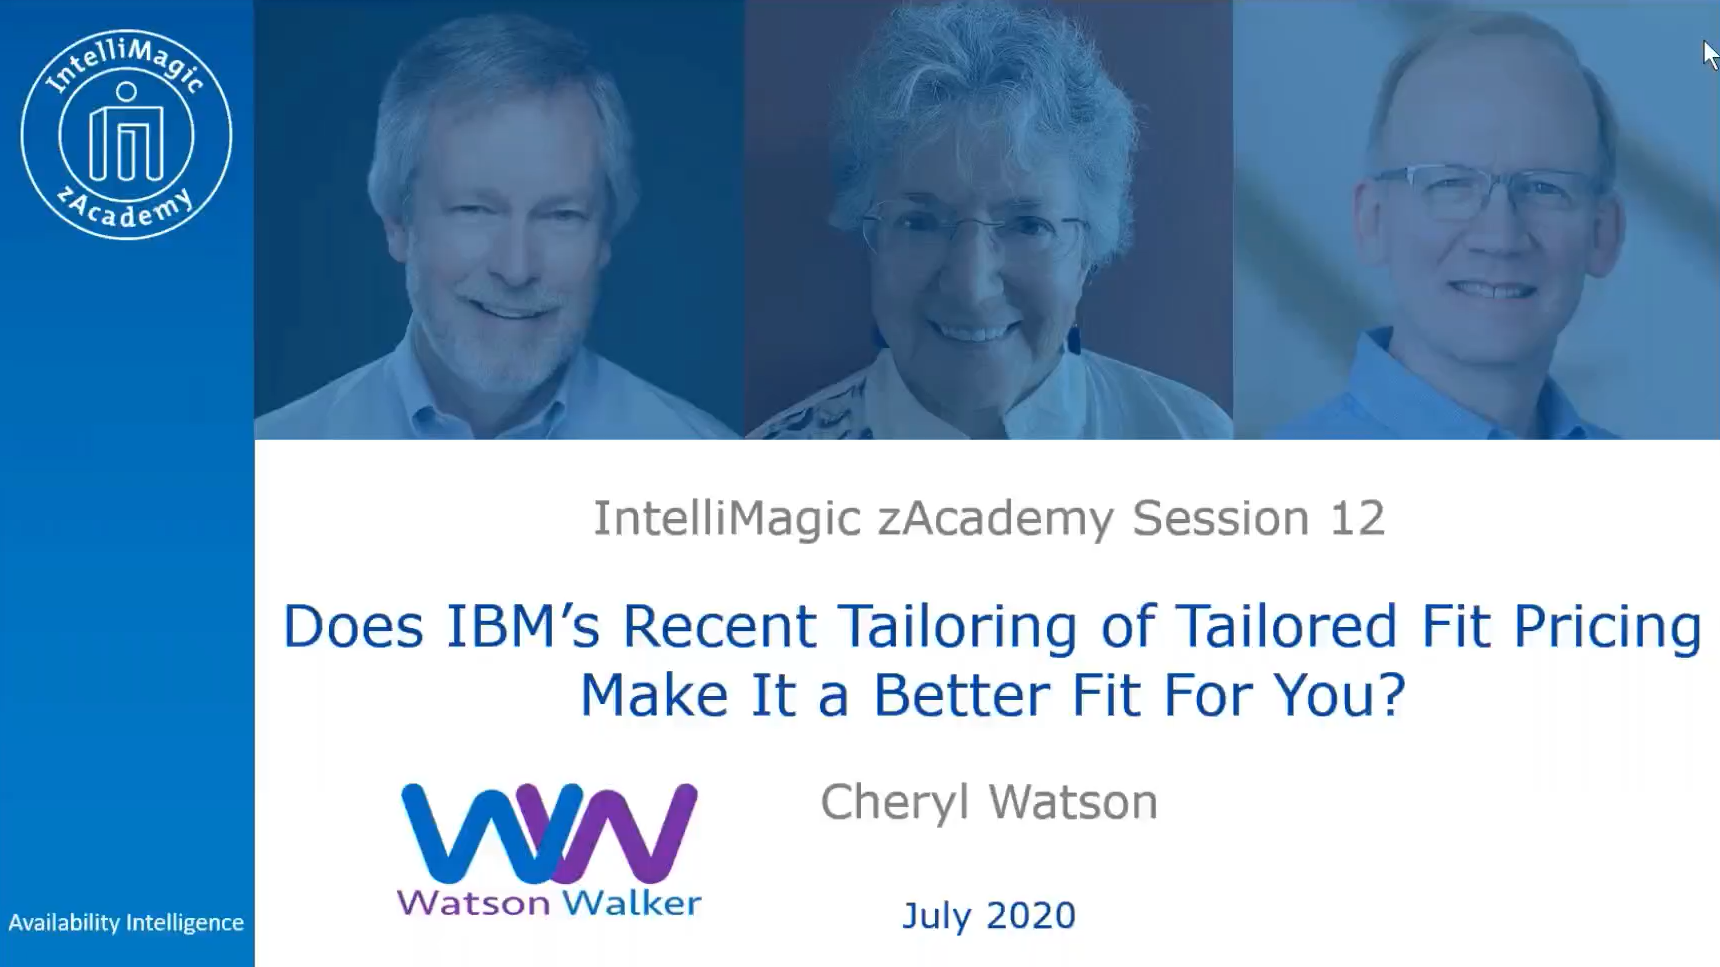 ibms tailored fit pricing updates and changes tfp - zacademy session thumbnail